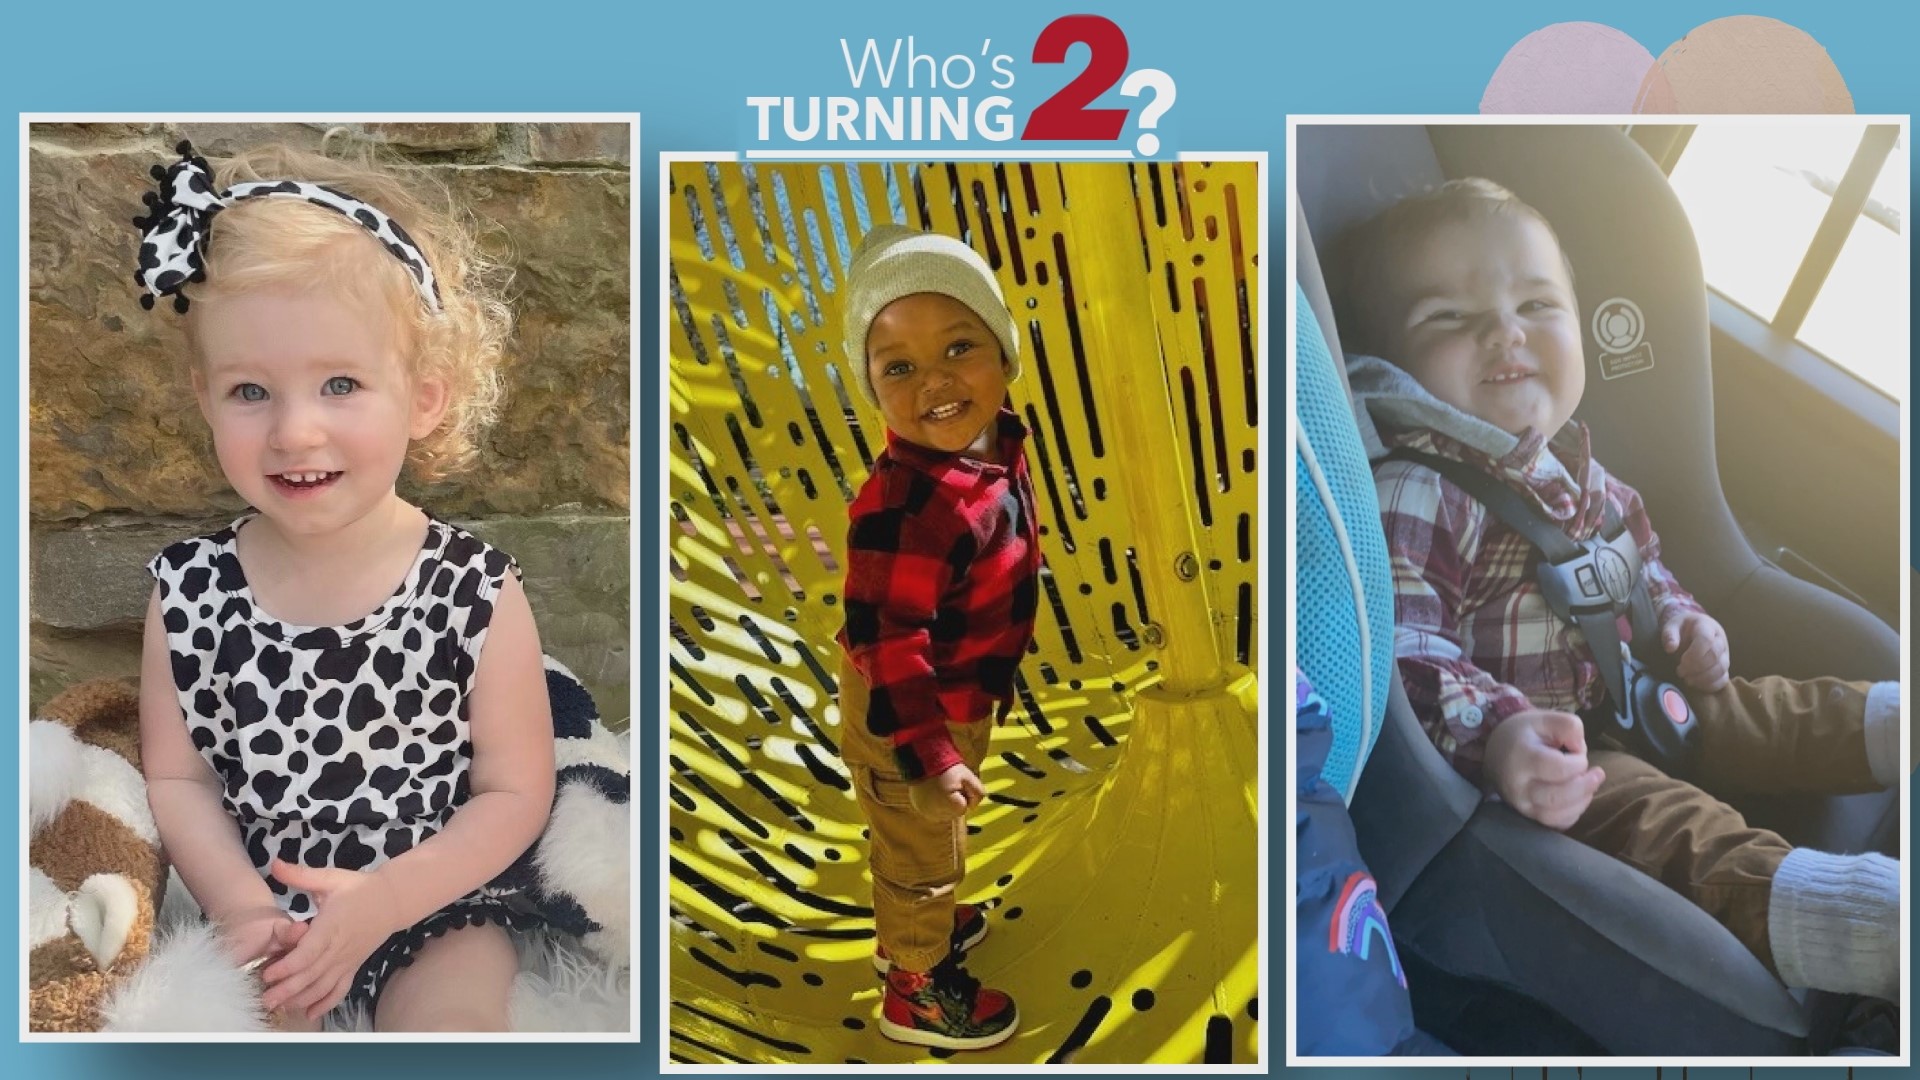 Let’s celebrate the kiddos turning 2 in the triad.